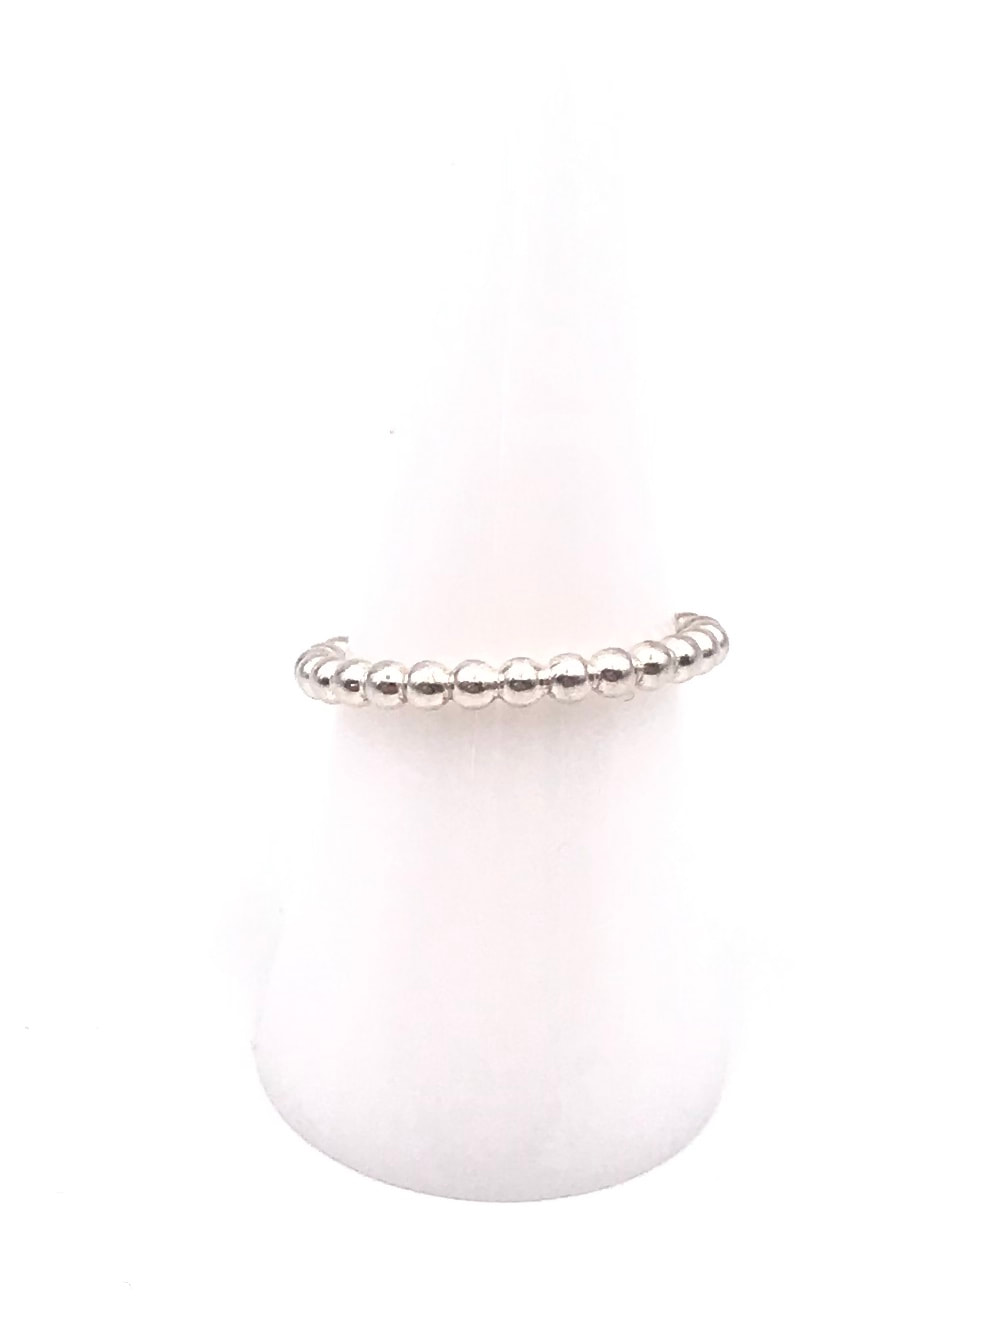 stacker ring, beaded, silver